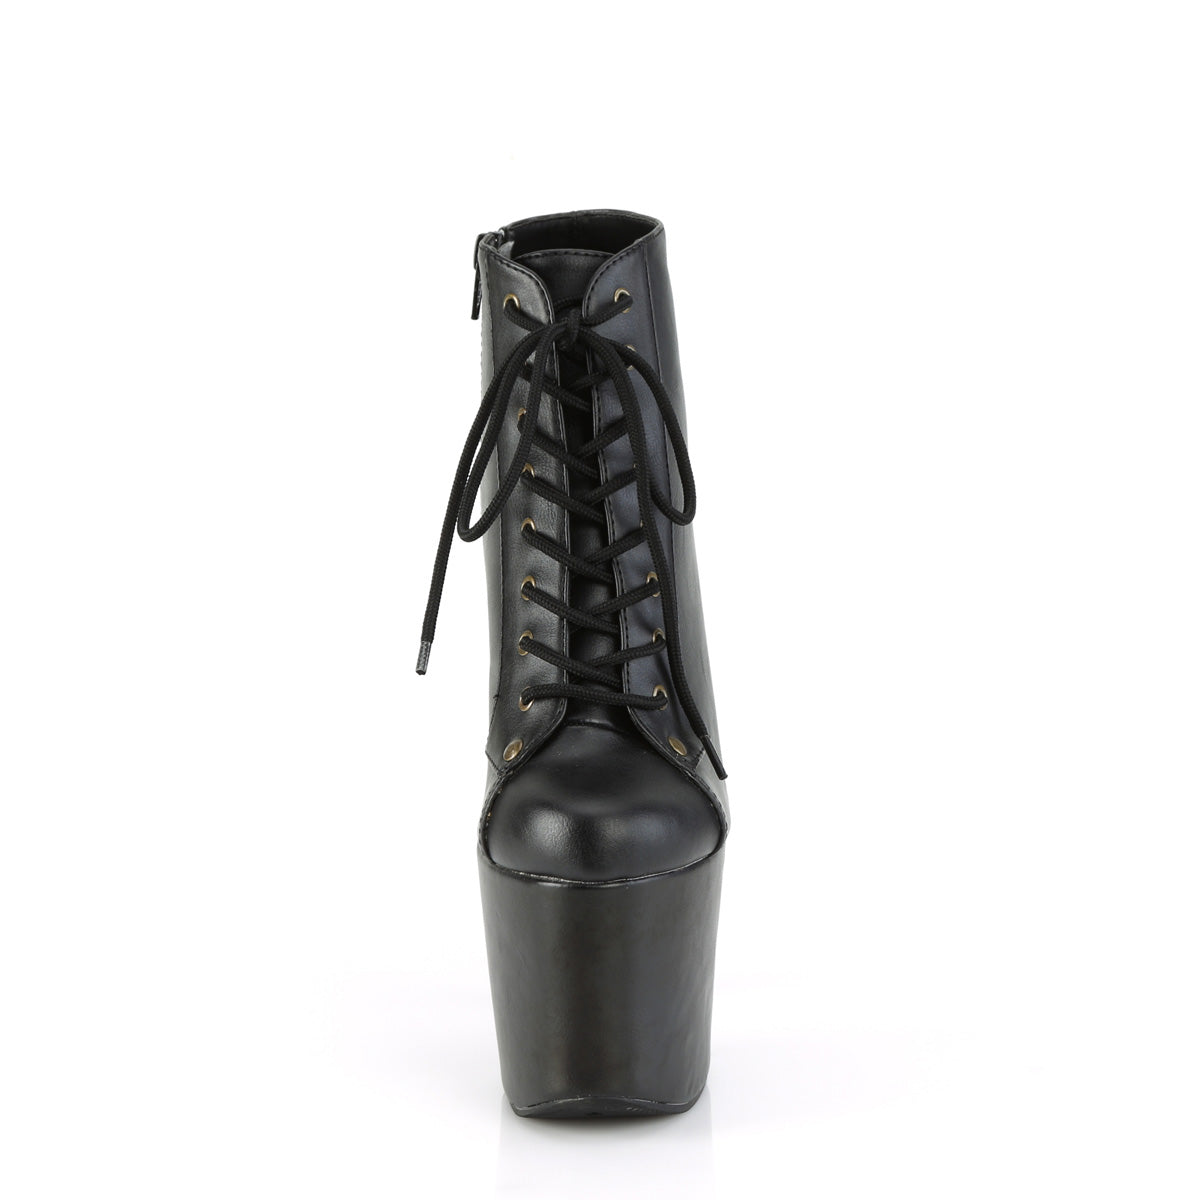 7 Inch Heel HEX-1005 Black Faux Leather